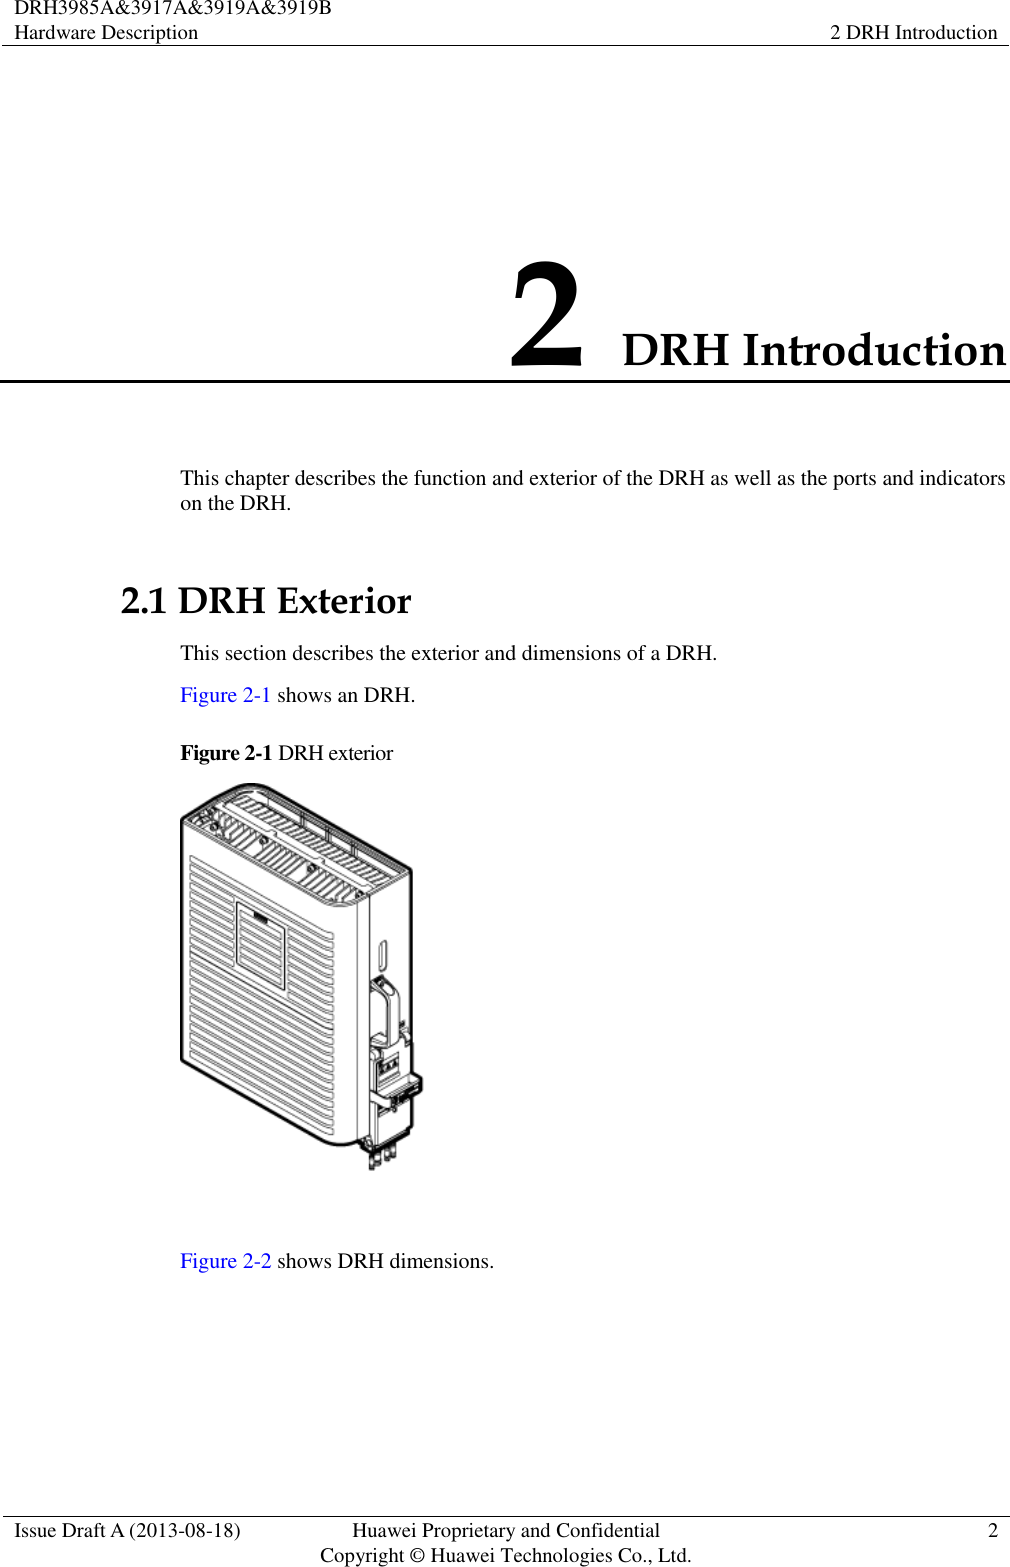 DRH3985A&amp;3917A&amp;3919A&amp;3919B Hardware Description 2 DRH Introduction  Issue Draft A (2013-08-18) Huawei Proprietary and Confidential                                     Copyright © Huawei Technologies Co., Ltd. 2  2 DRH Introduction This chapter describes the function and exterior of the DRH as well as the ports and indicators on the DRH. 2.1 DRH Exterior This section describes the exterior and dimensions of a DRH. Figure 2-1 shows an DRH.   Figure 2-1 DRH exterior   Figure 2-2 shows DRH dimensions. 